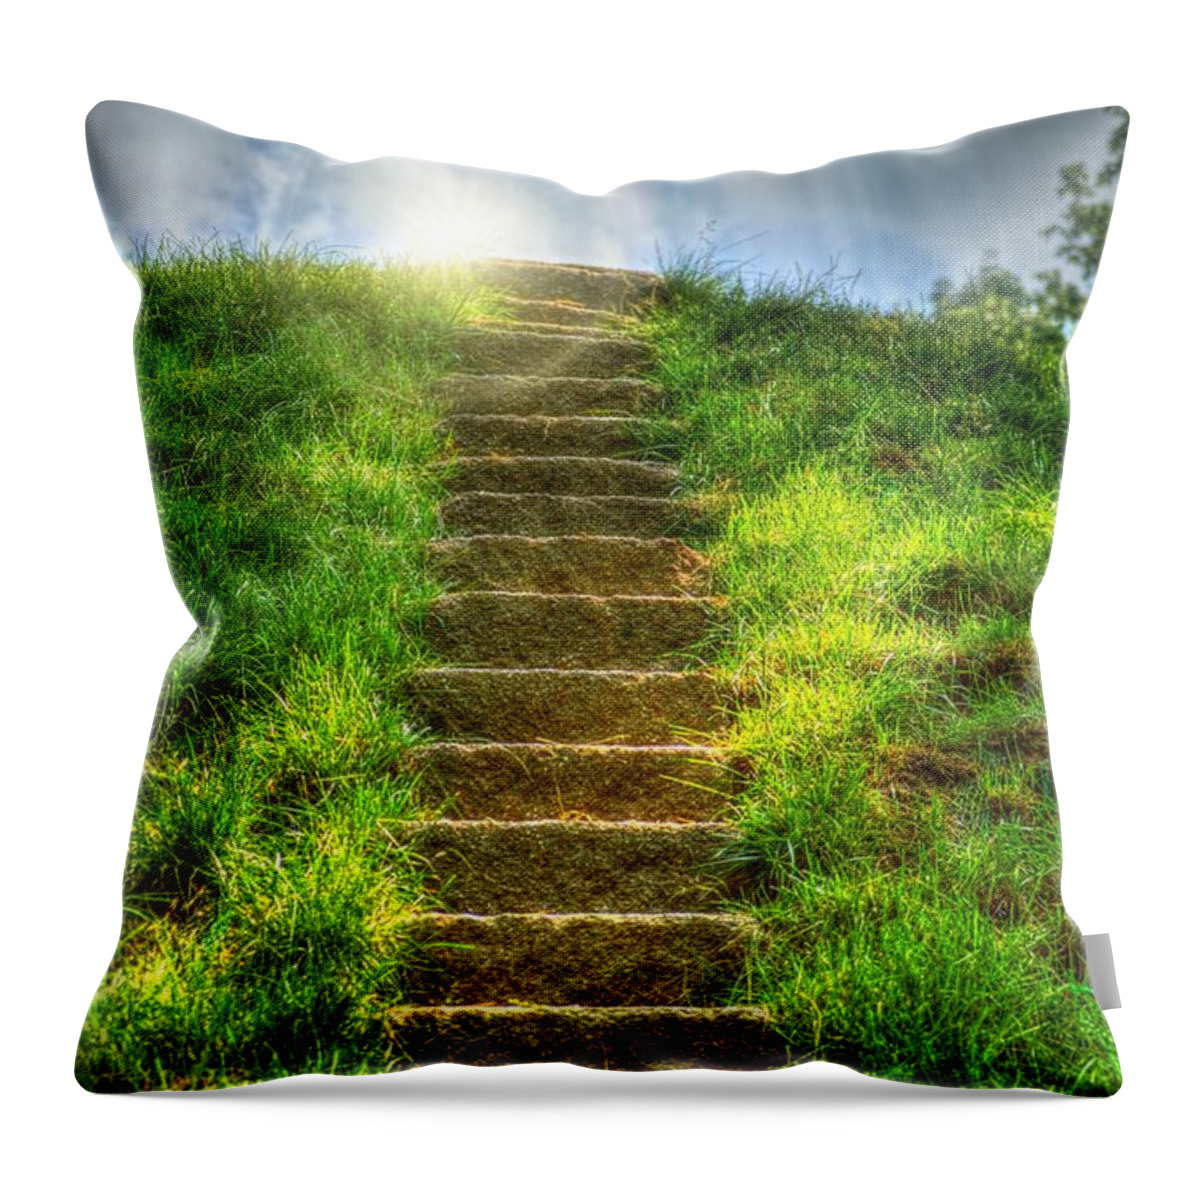 Peggy Franz Throw Pillow featuring the photograph Magical Stairway by Peggy Franz